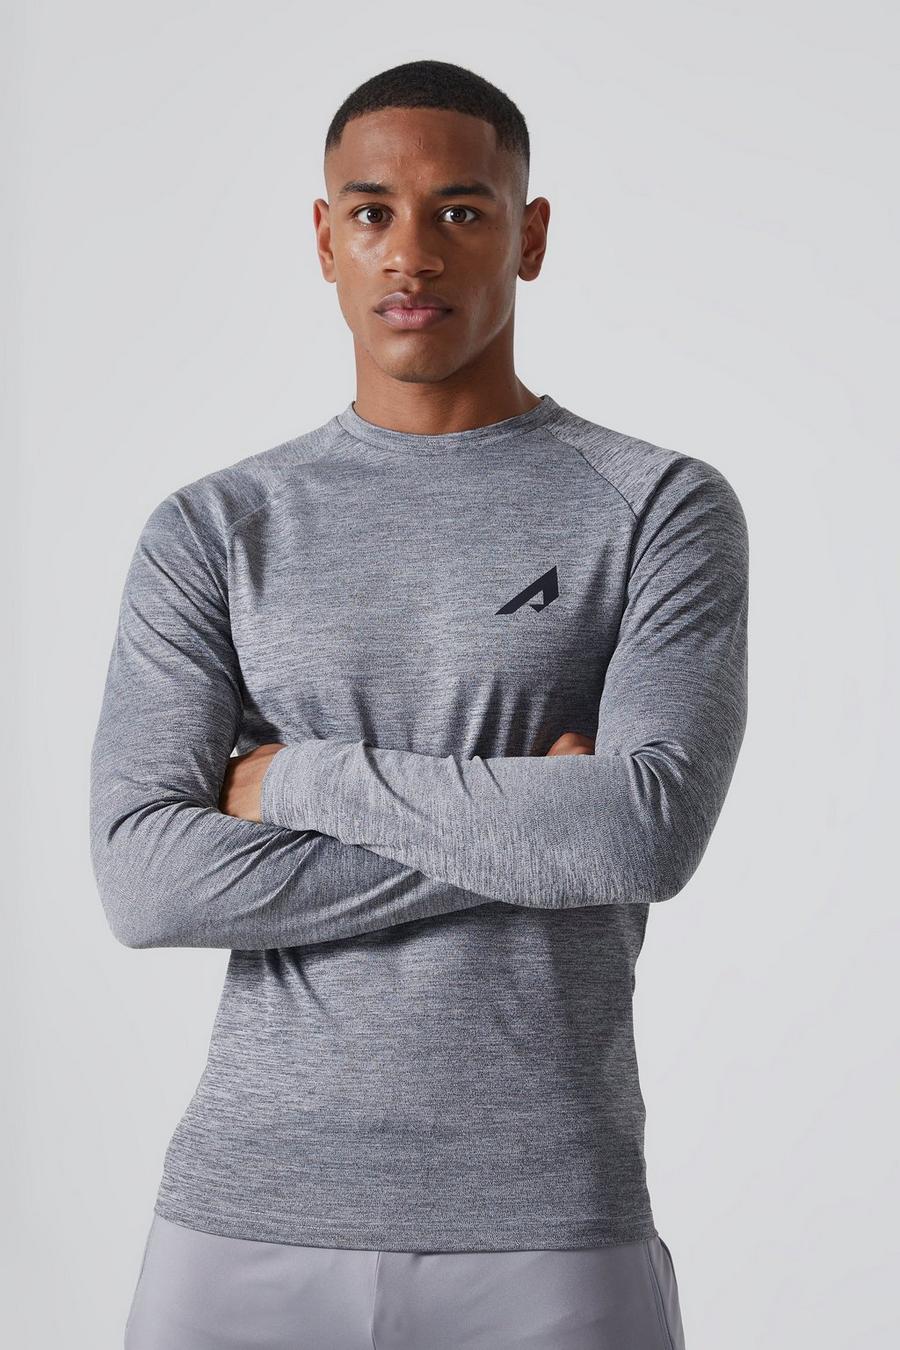 Charcoal grey Active Muscle Fit Space Dye Long Top